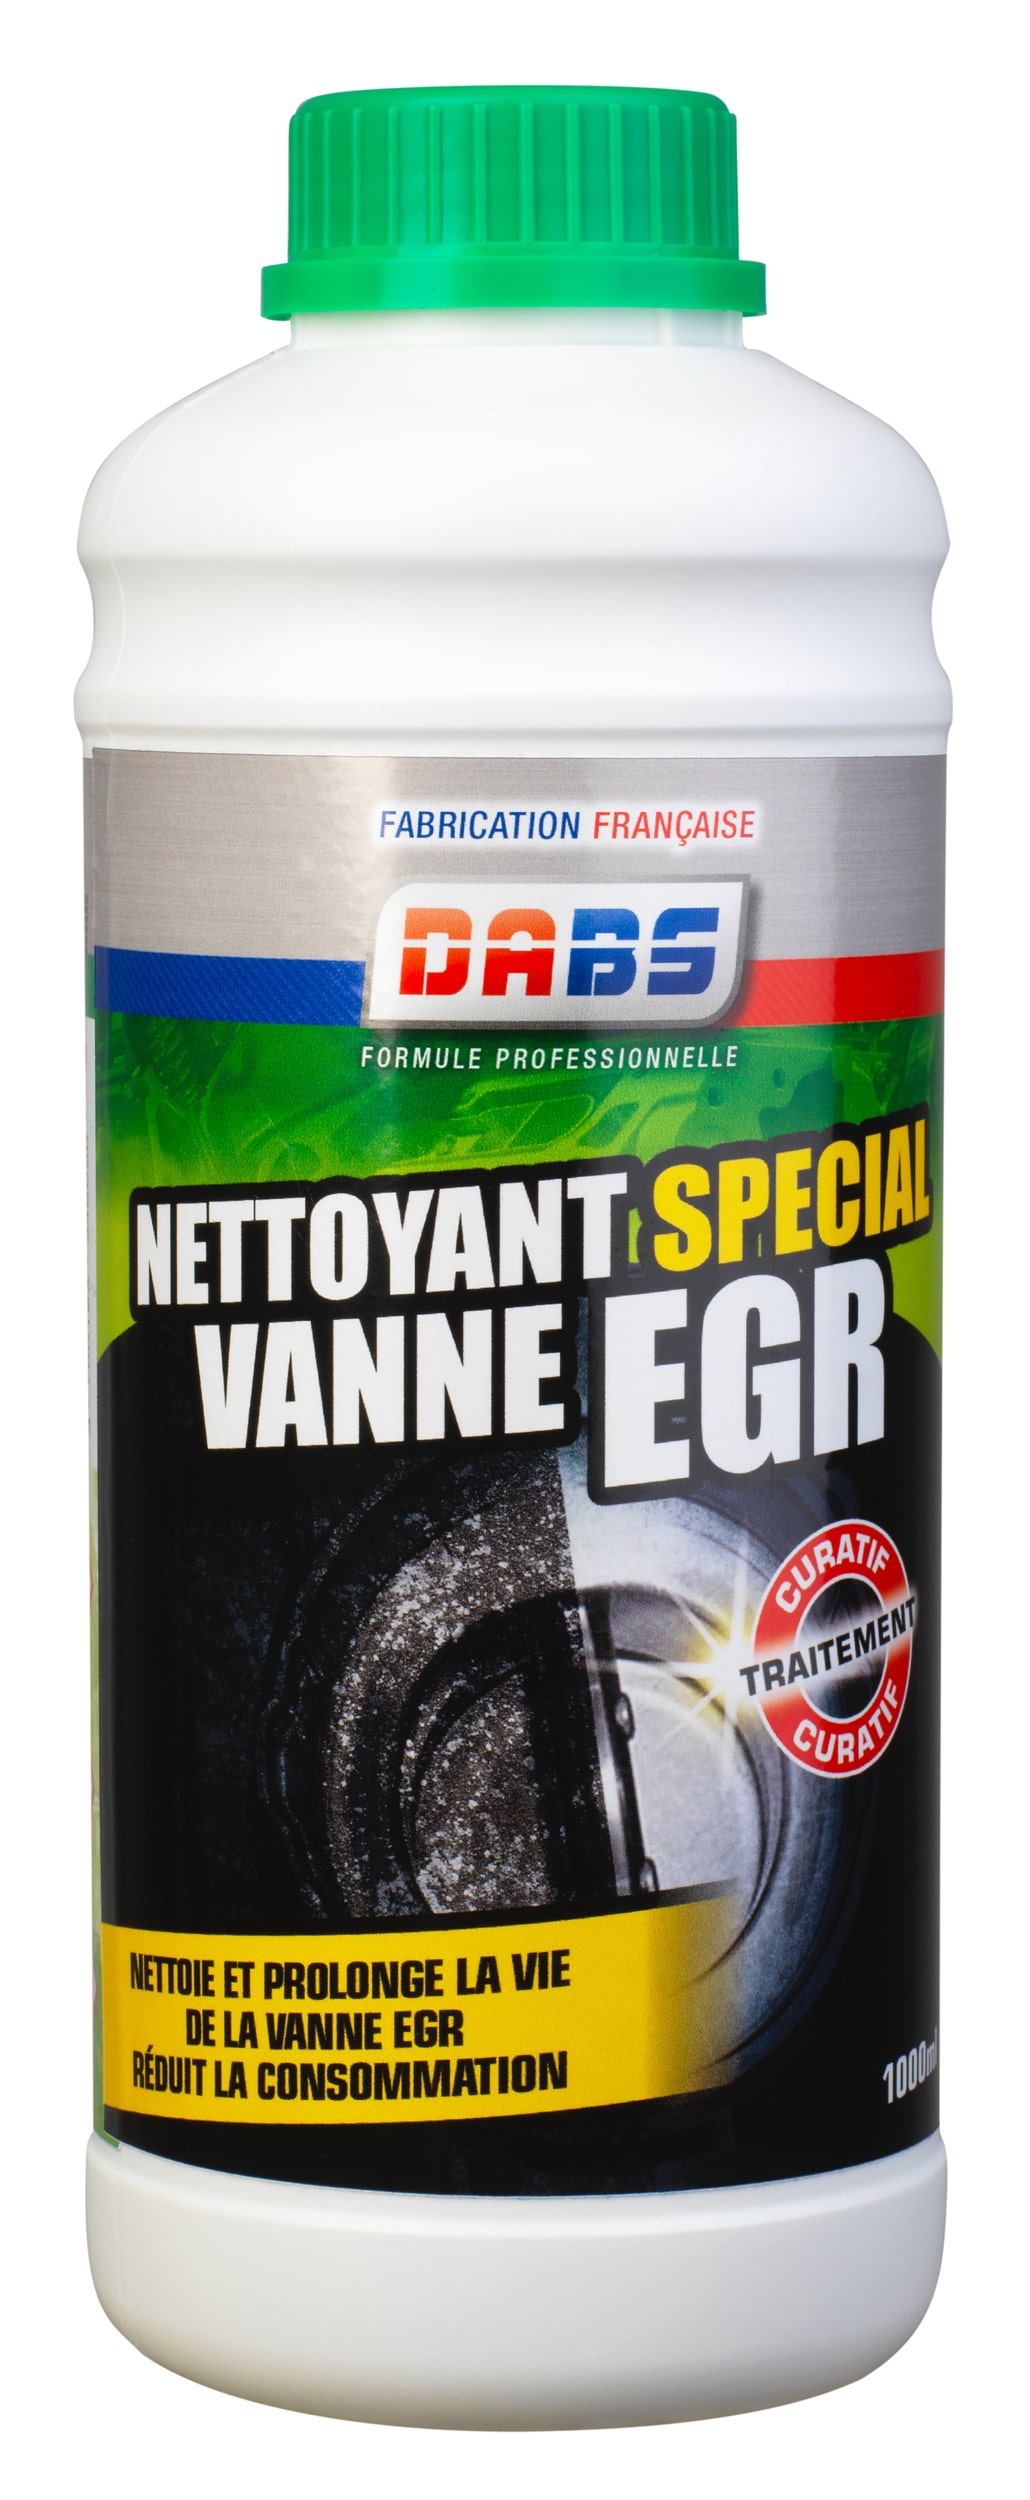 Vanne EGR  Carbon Cleaning Canada